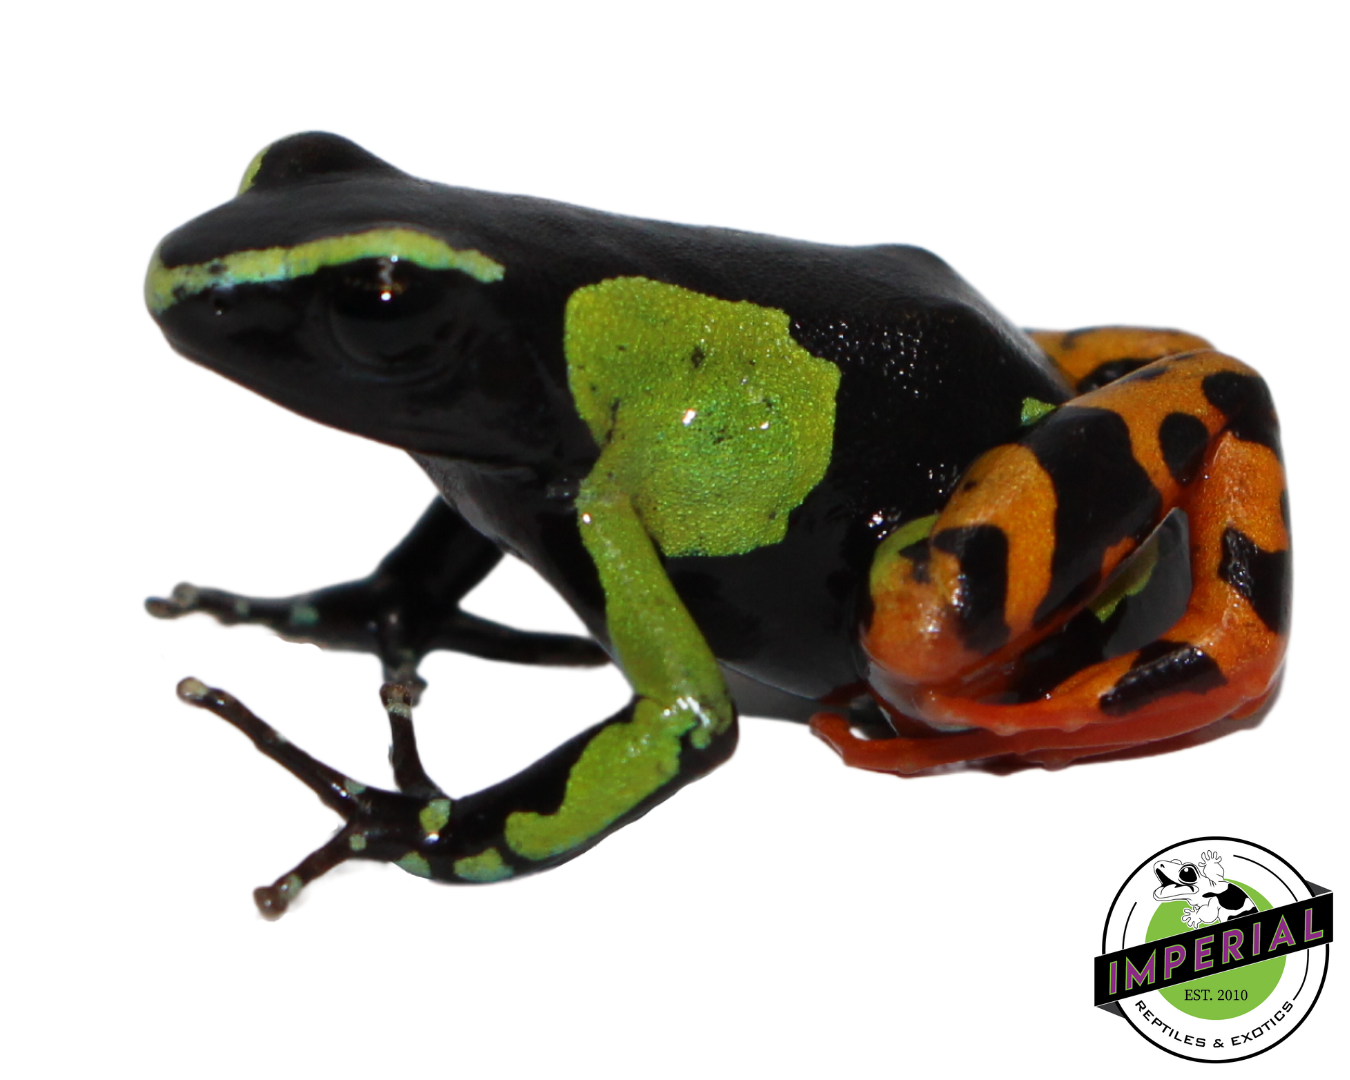 Painted Mantella for sale, reptiles for sale, buy reptiles online